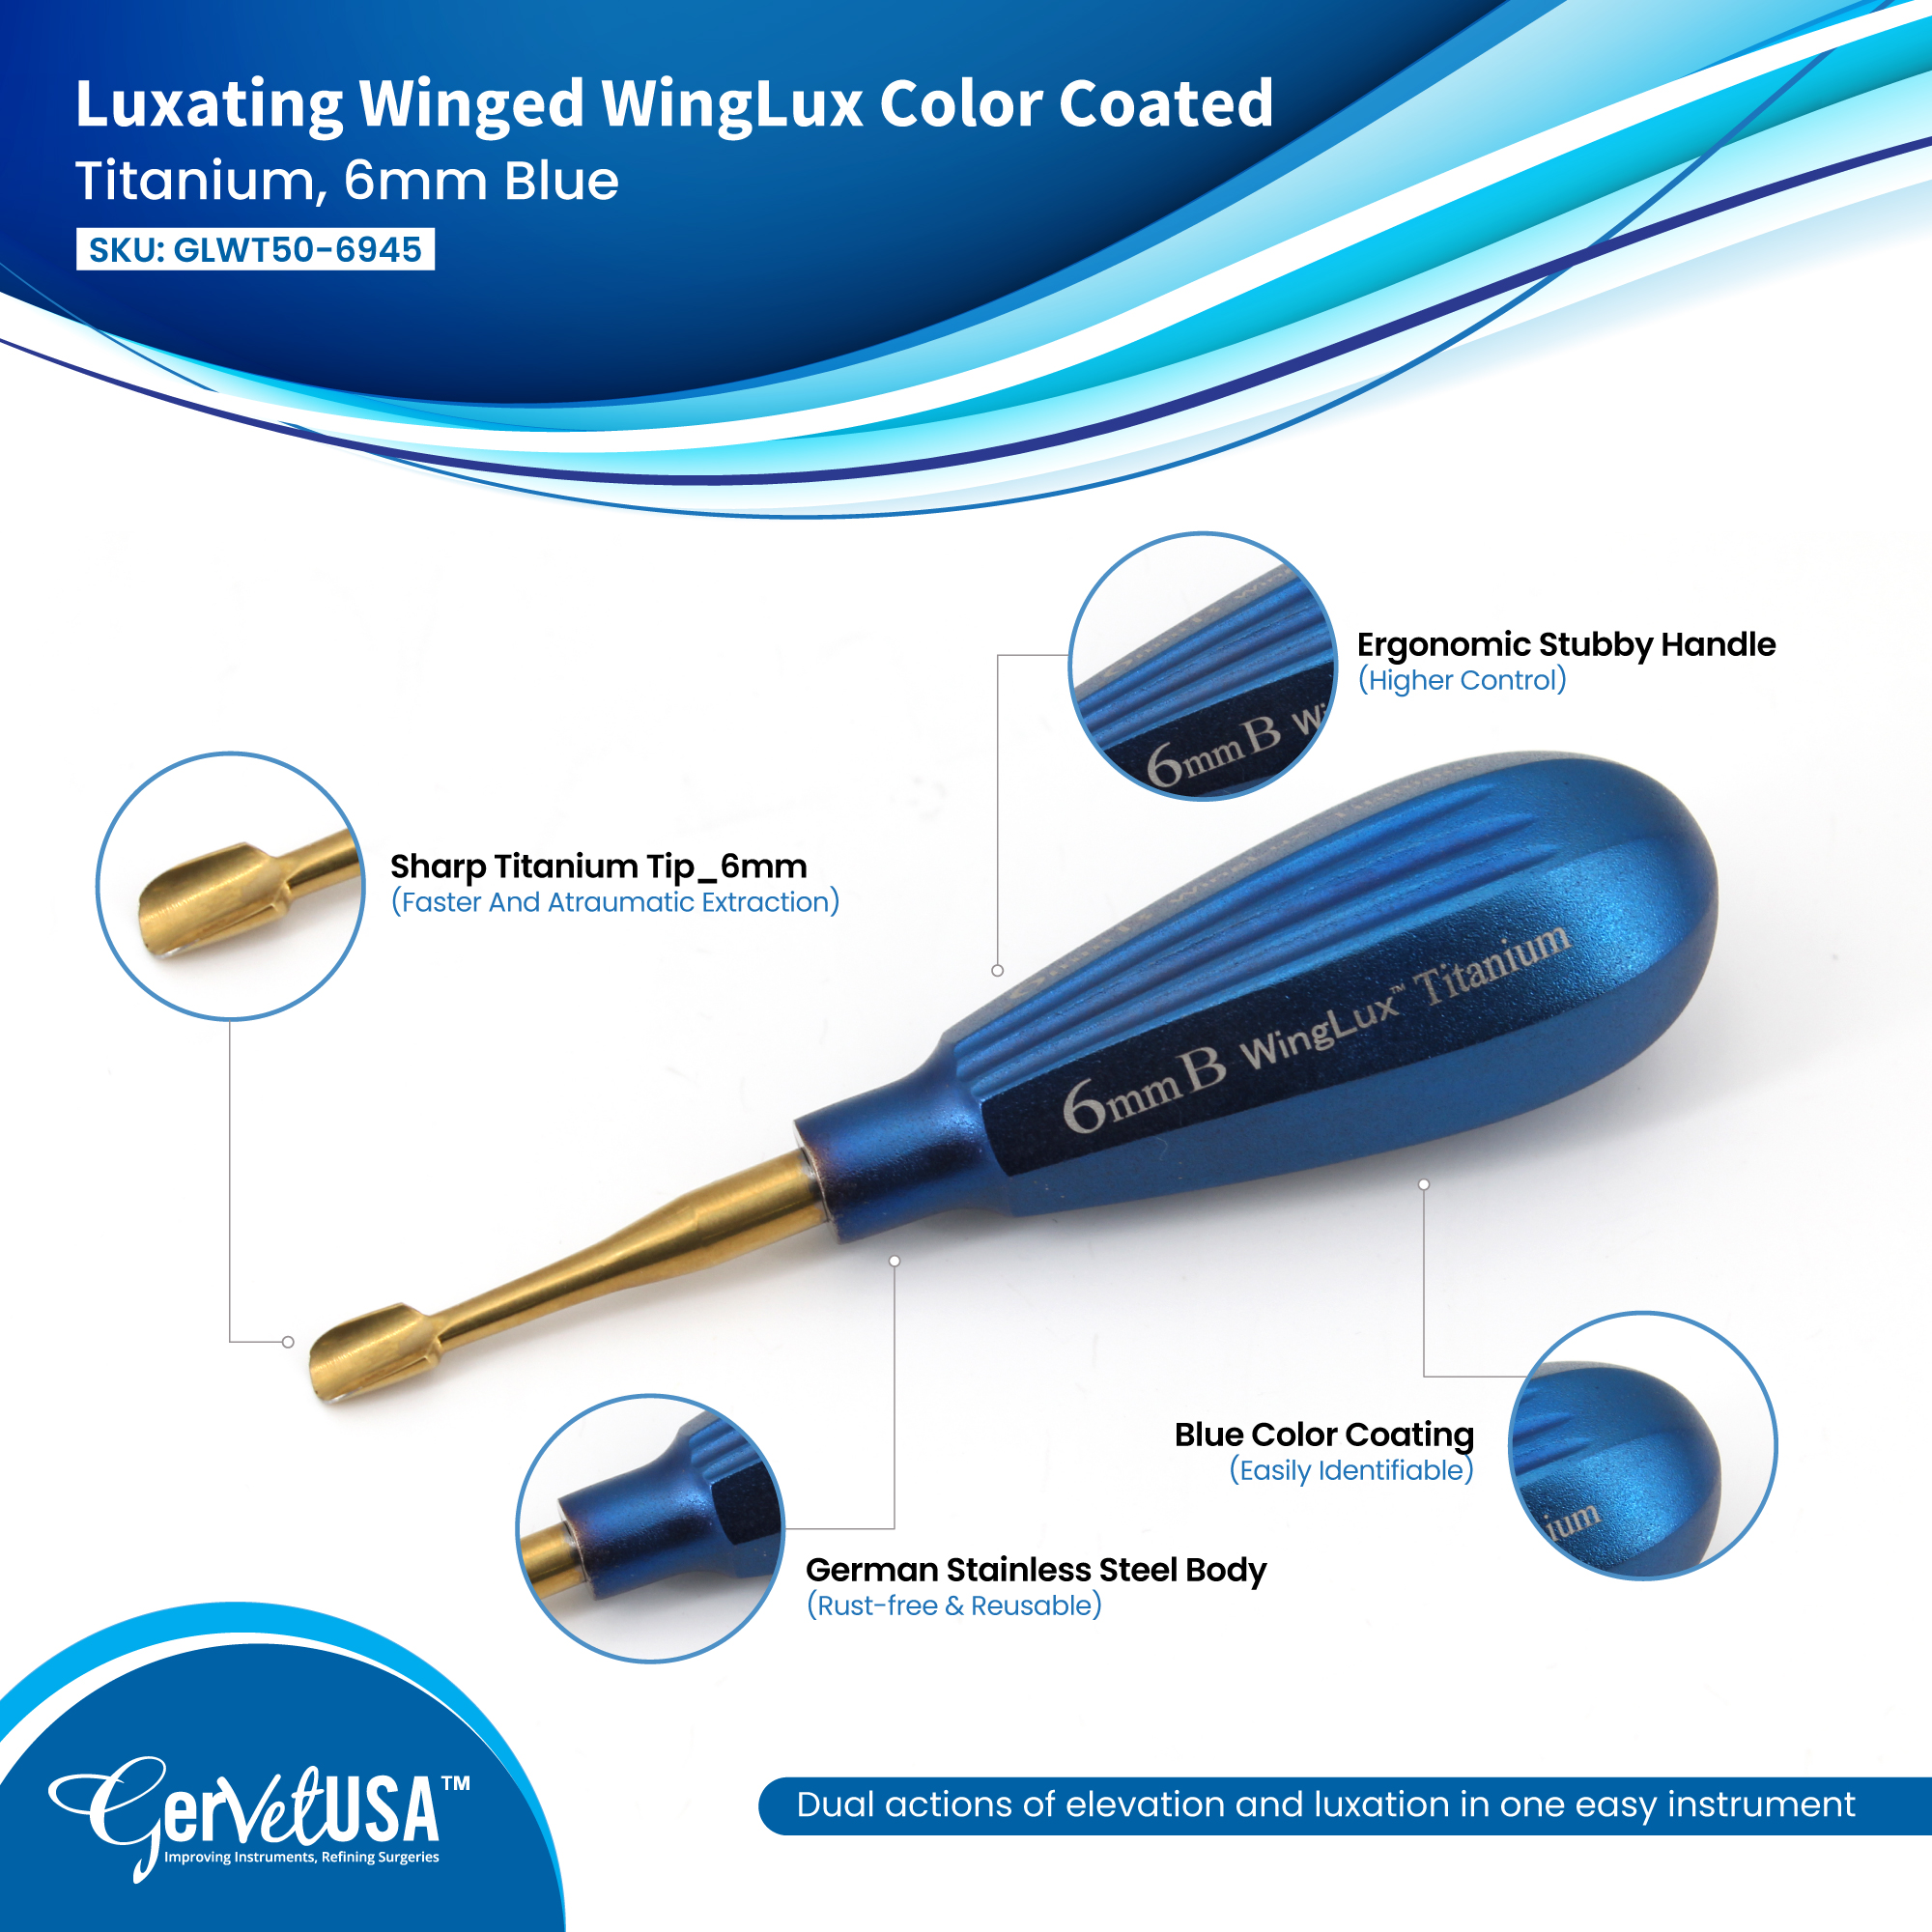 Luxating Winged WingLux Color Coated Titanium, 6mm Blue